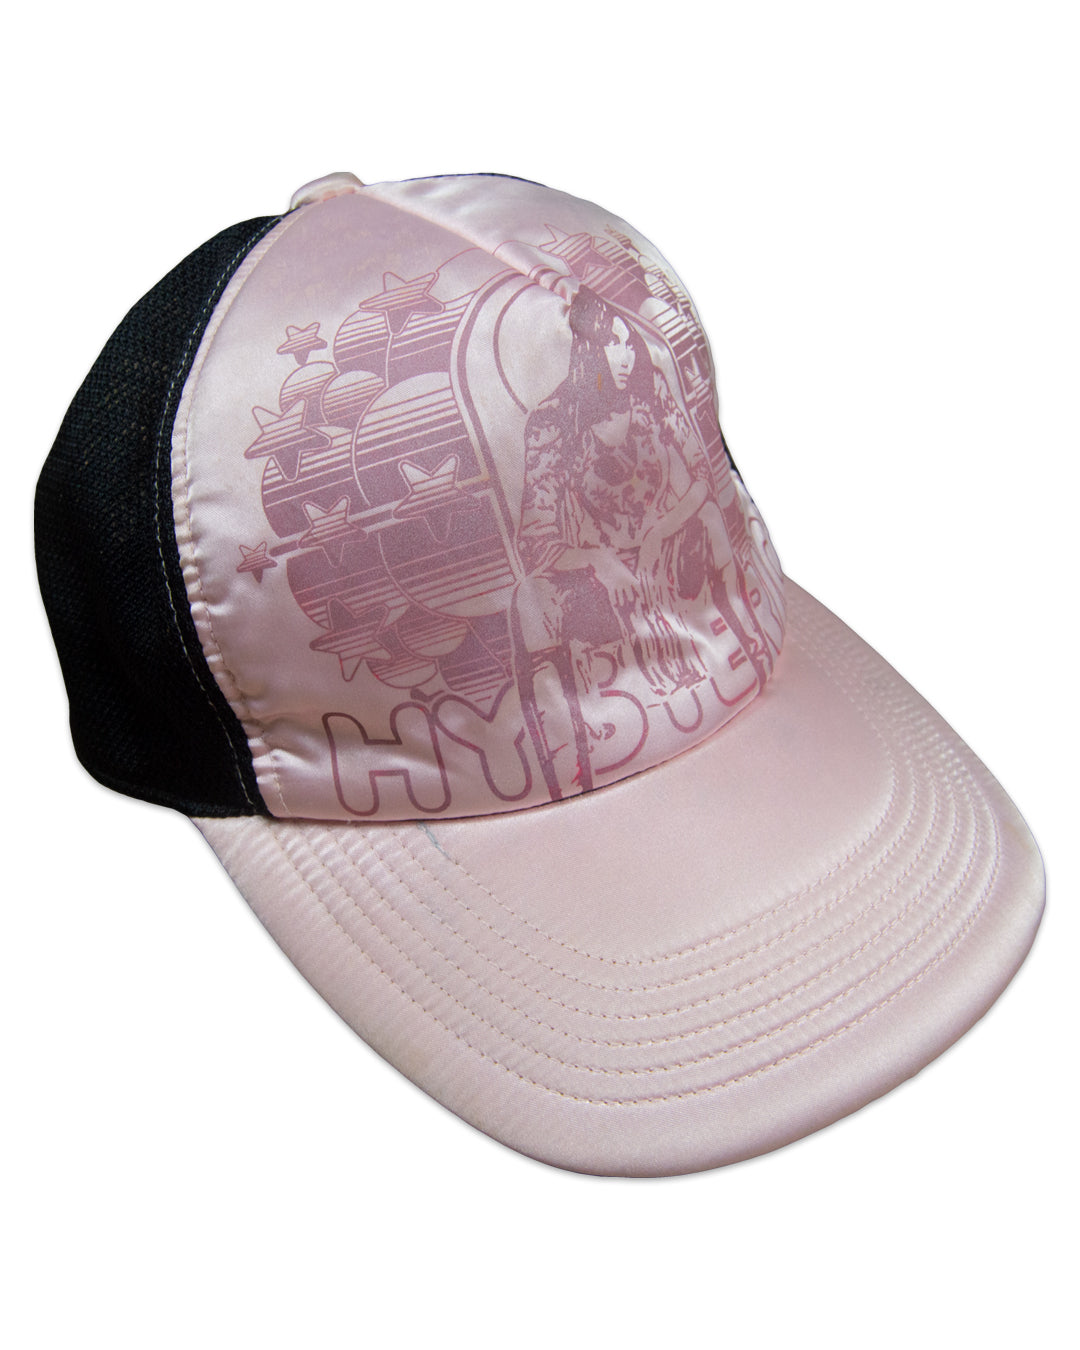 Hysteric Glamour Retro Pin Up Logo Trucker Hat